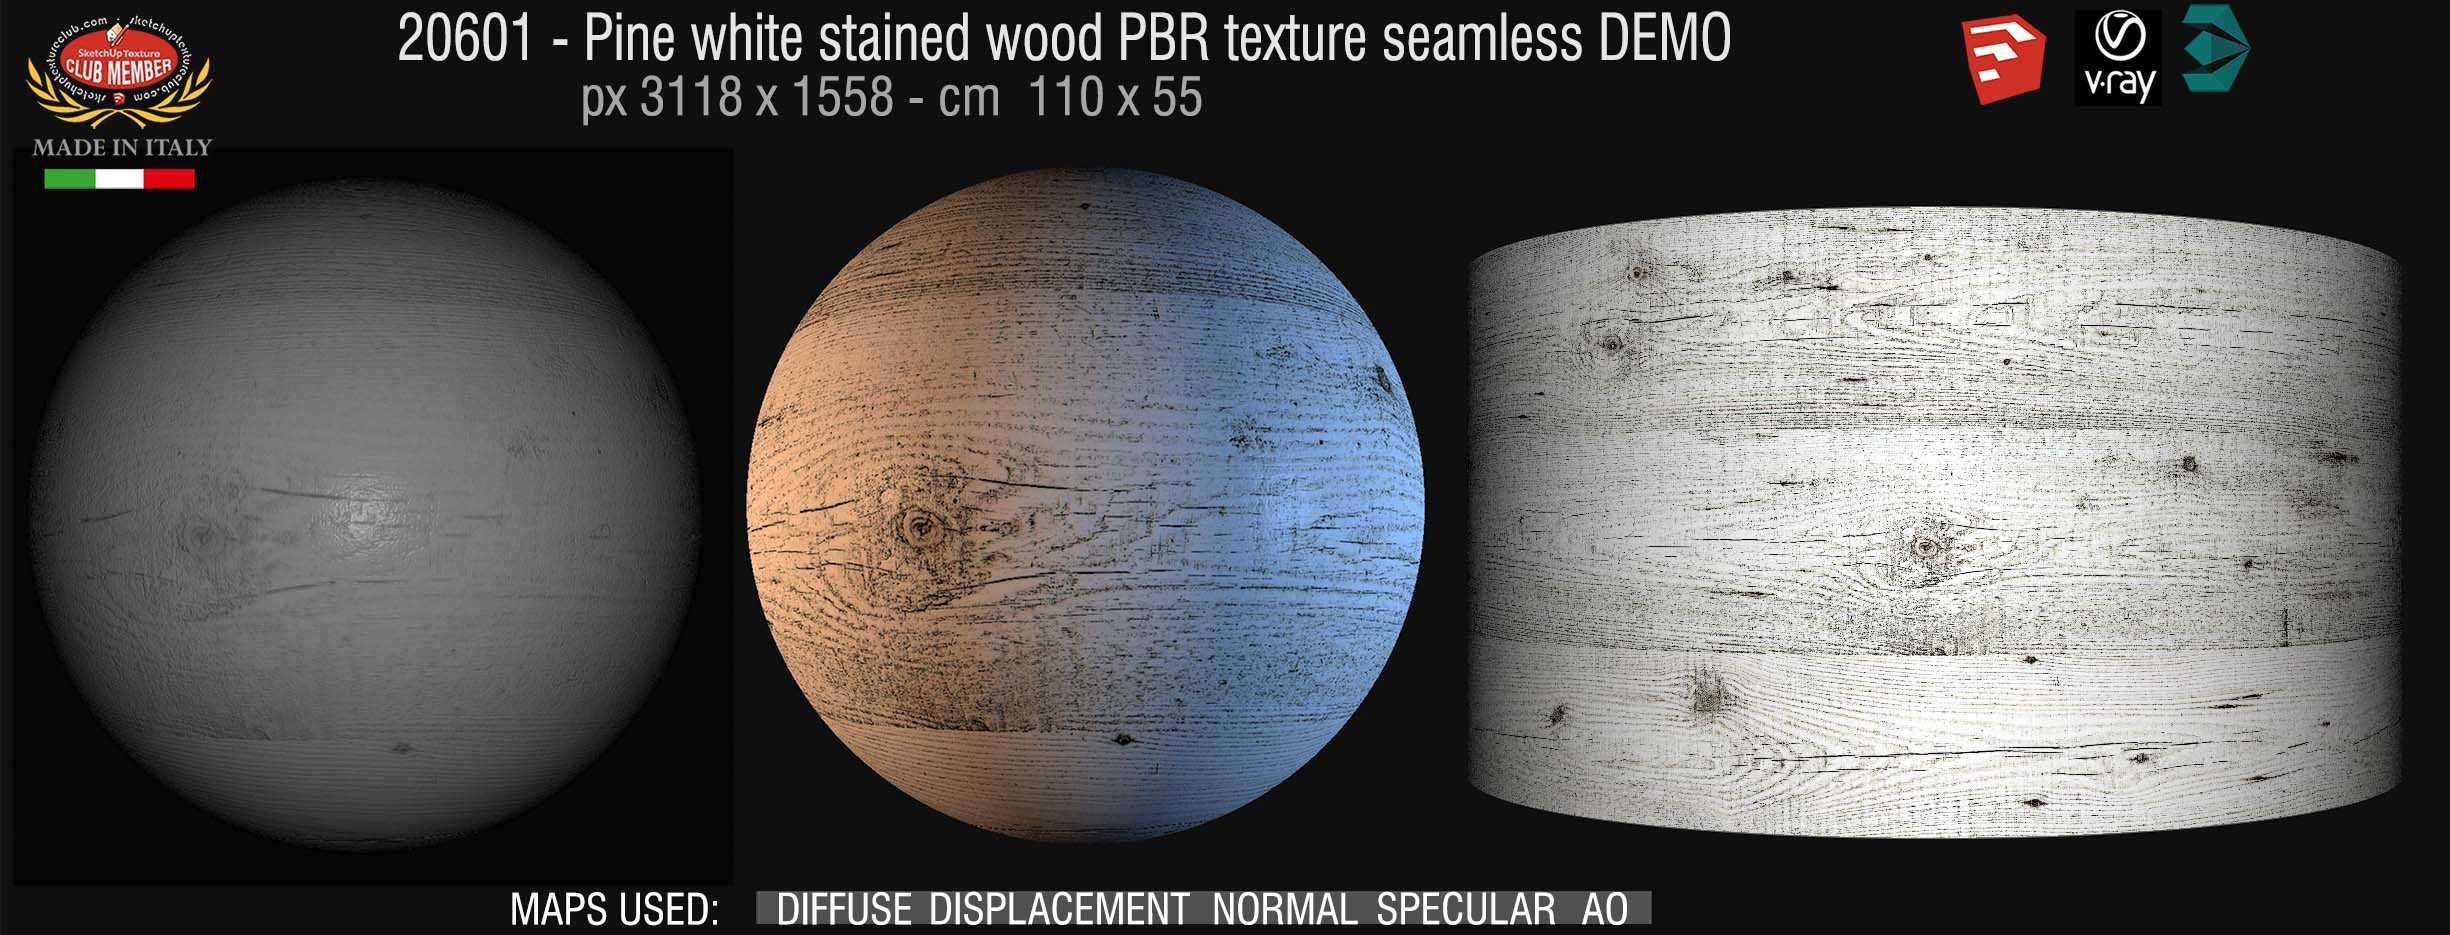 20601 pine white stained PBR wood texture seamless DEMO